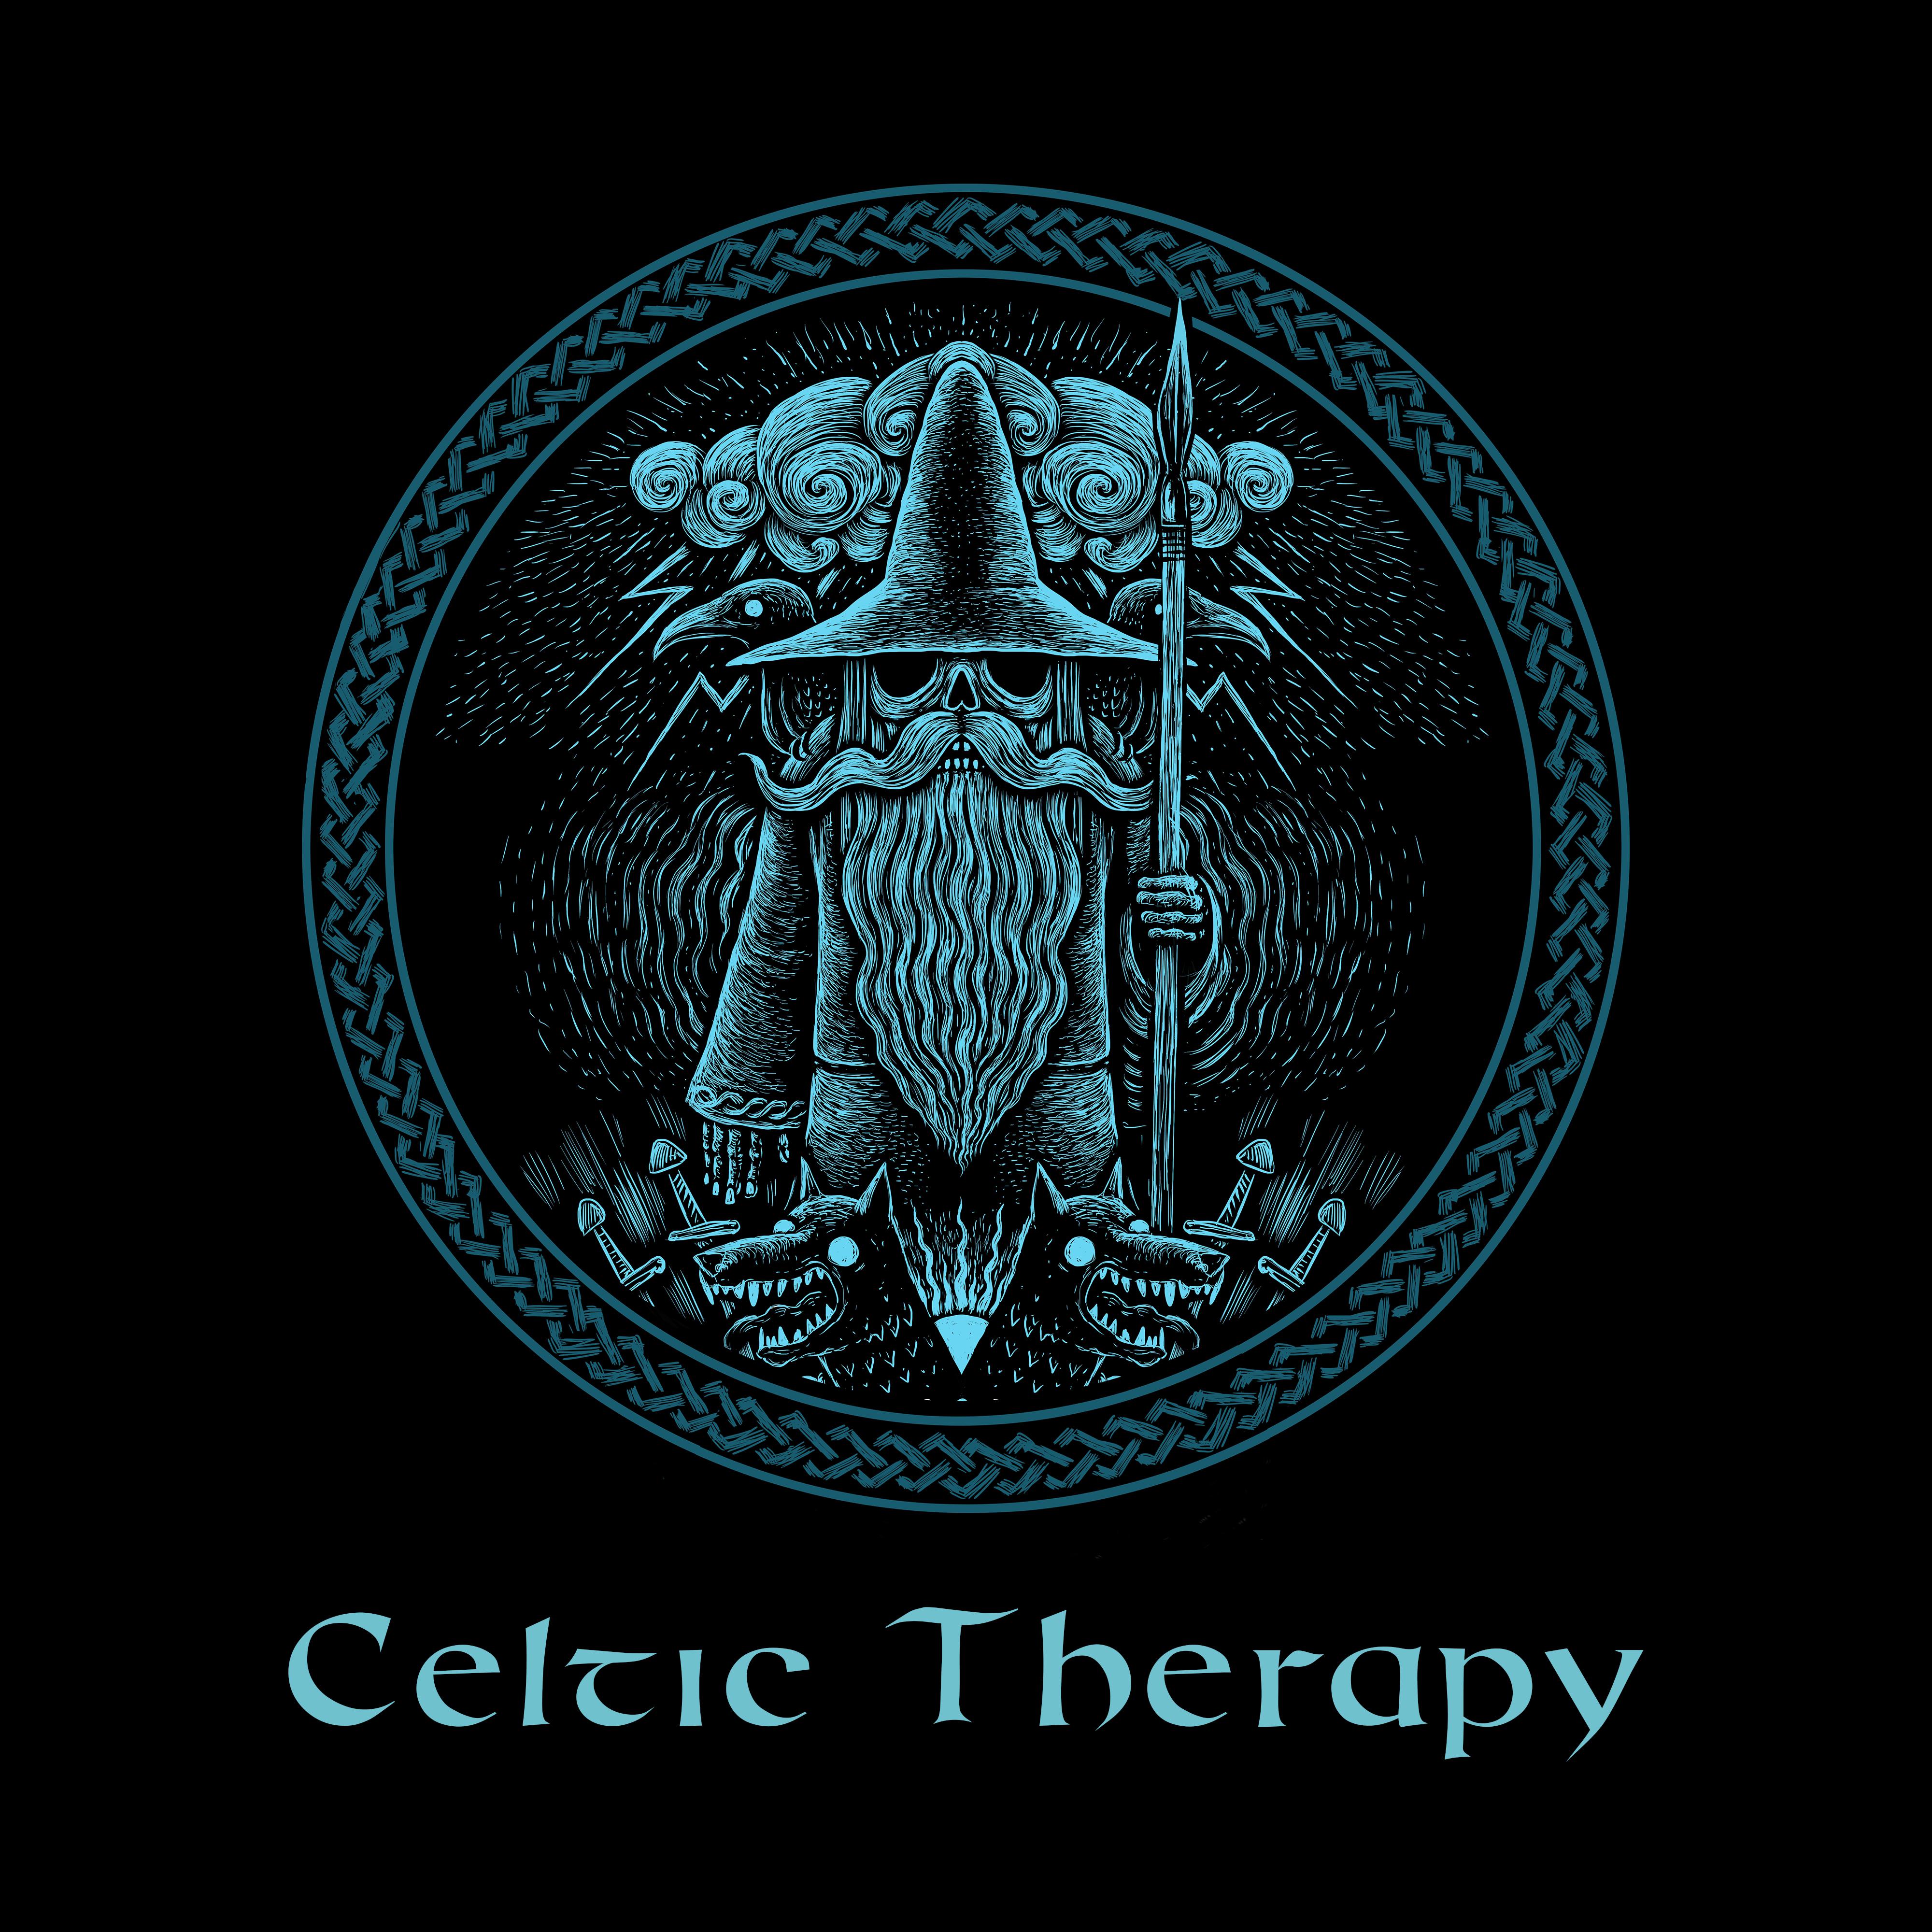 Celtic Therapy - Soothing Music for Spa, Relaxing Treatments, Rest, Relieving Stress and Tension, Sleeping Problems and Insomnia